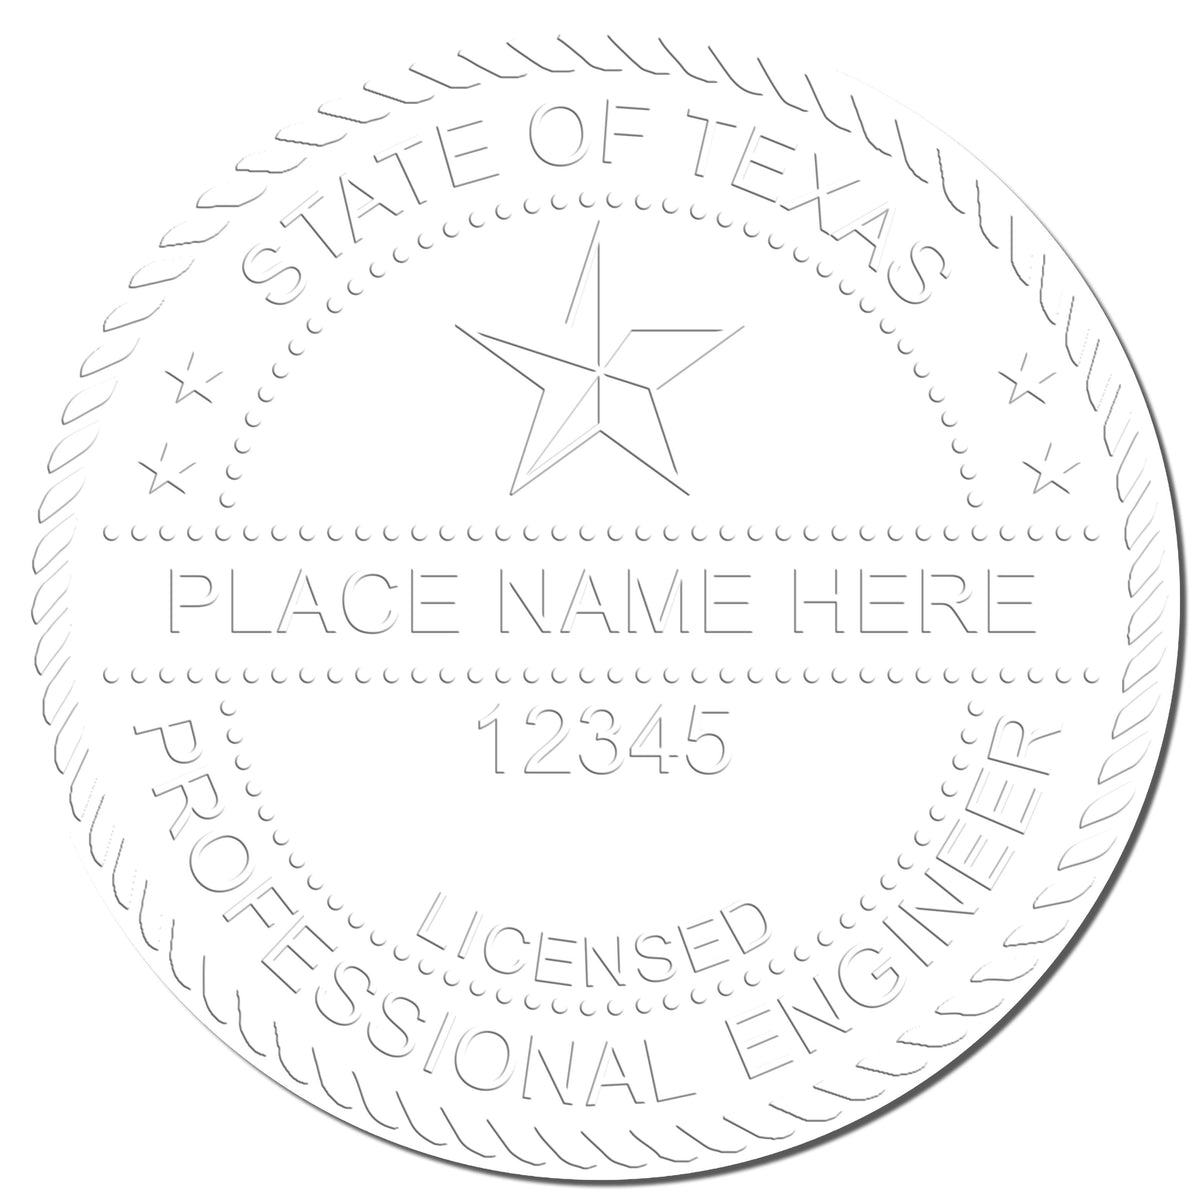 Another Example of a stamped impression of the Texas Engineer Desk Seal on a piece of office paper.